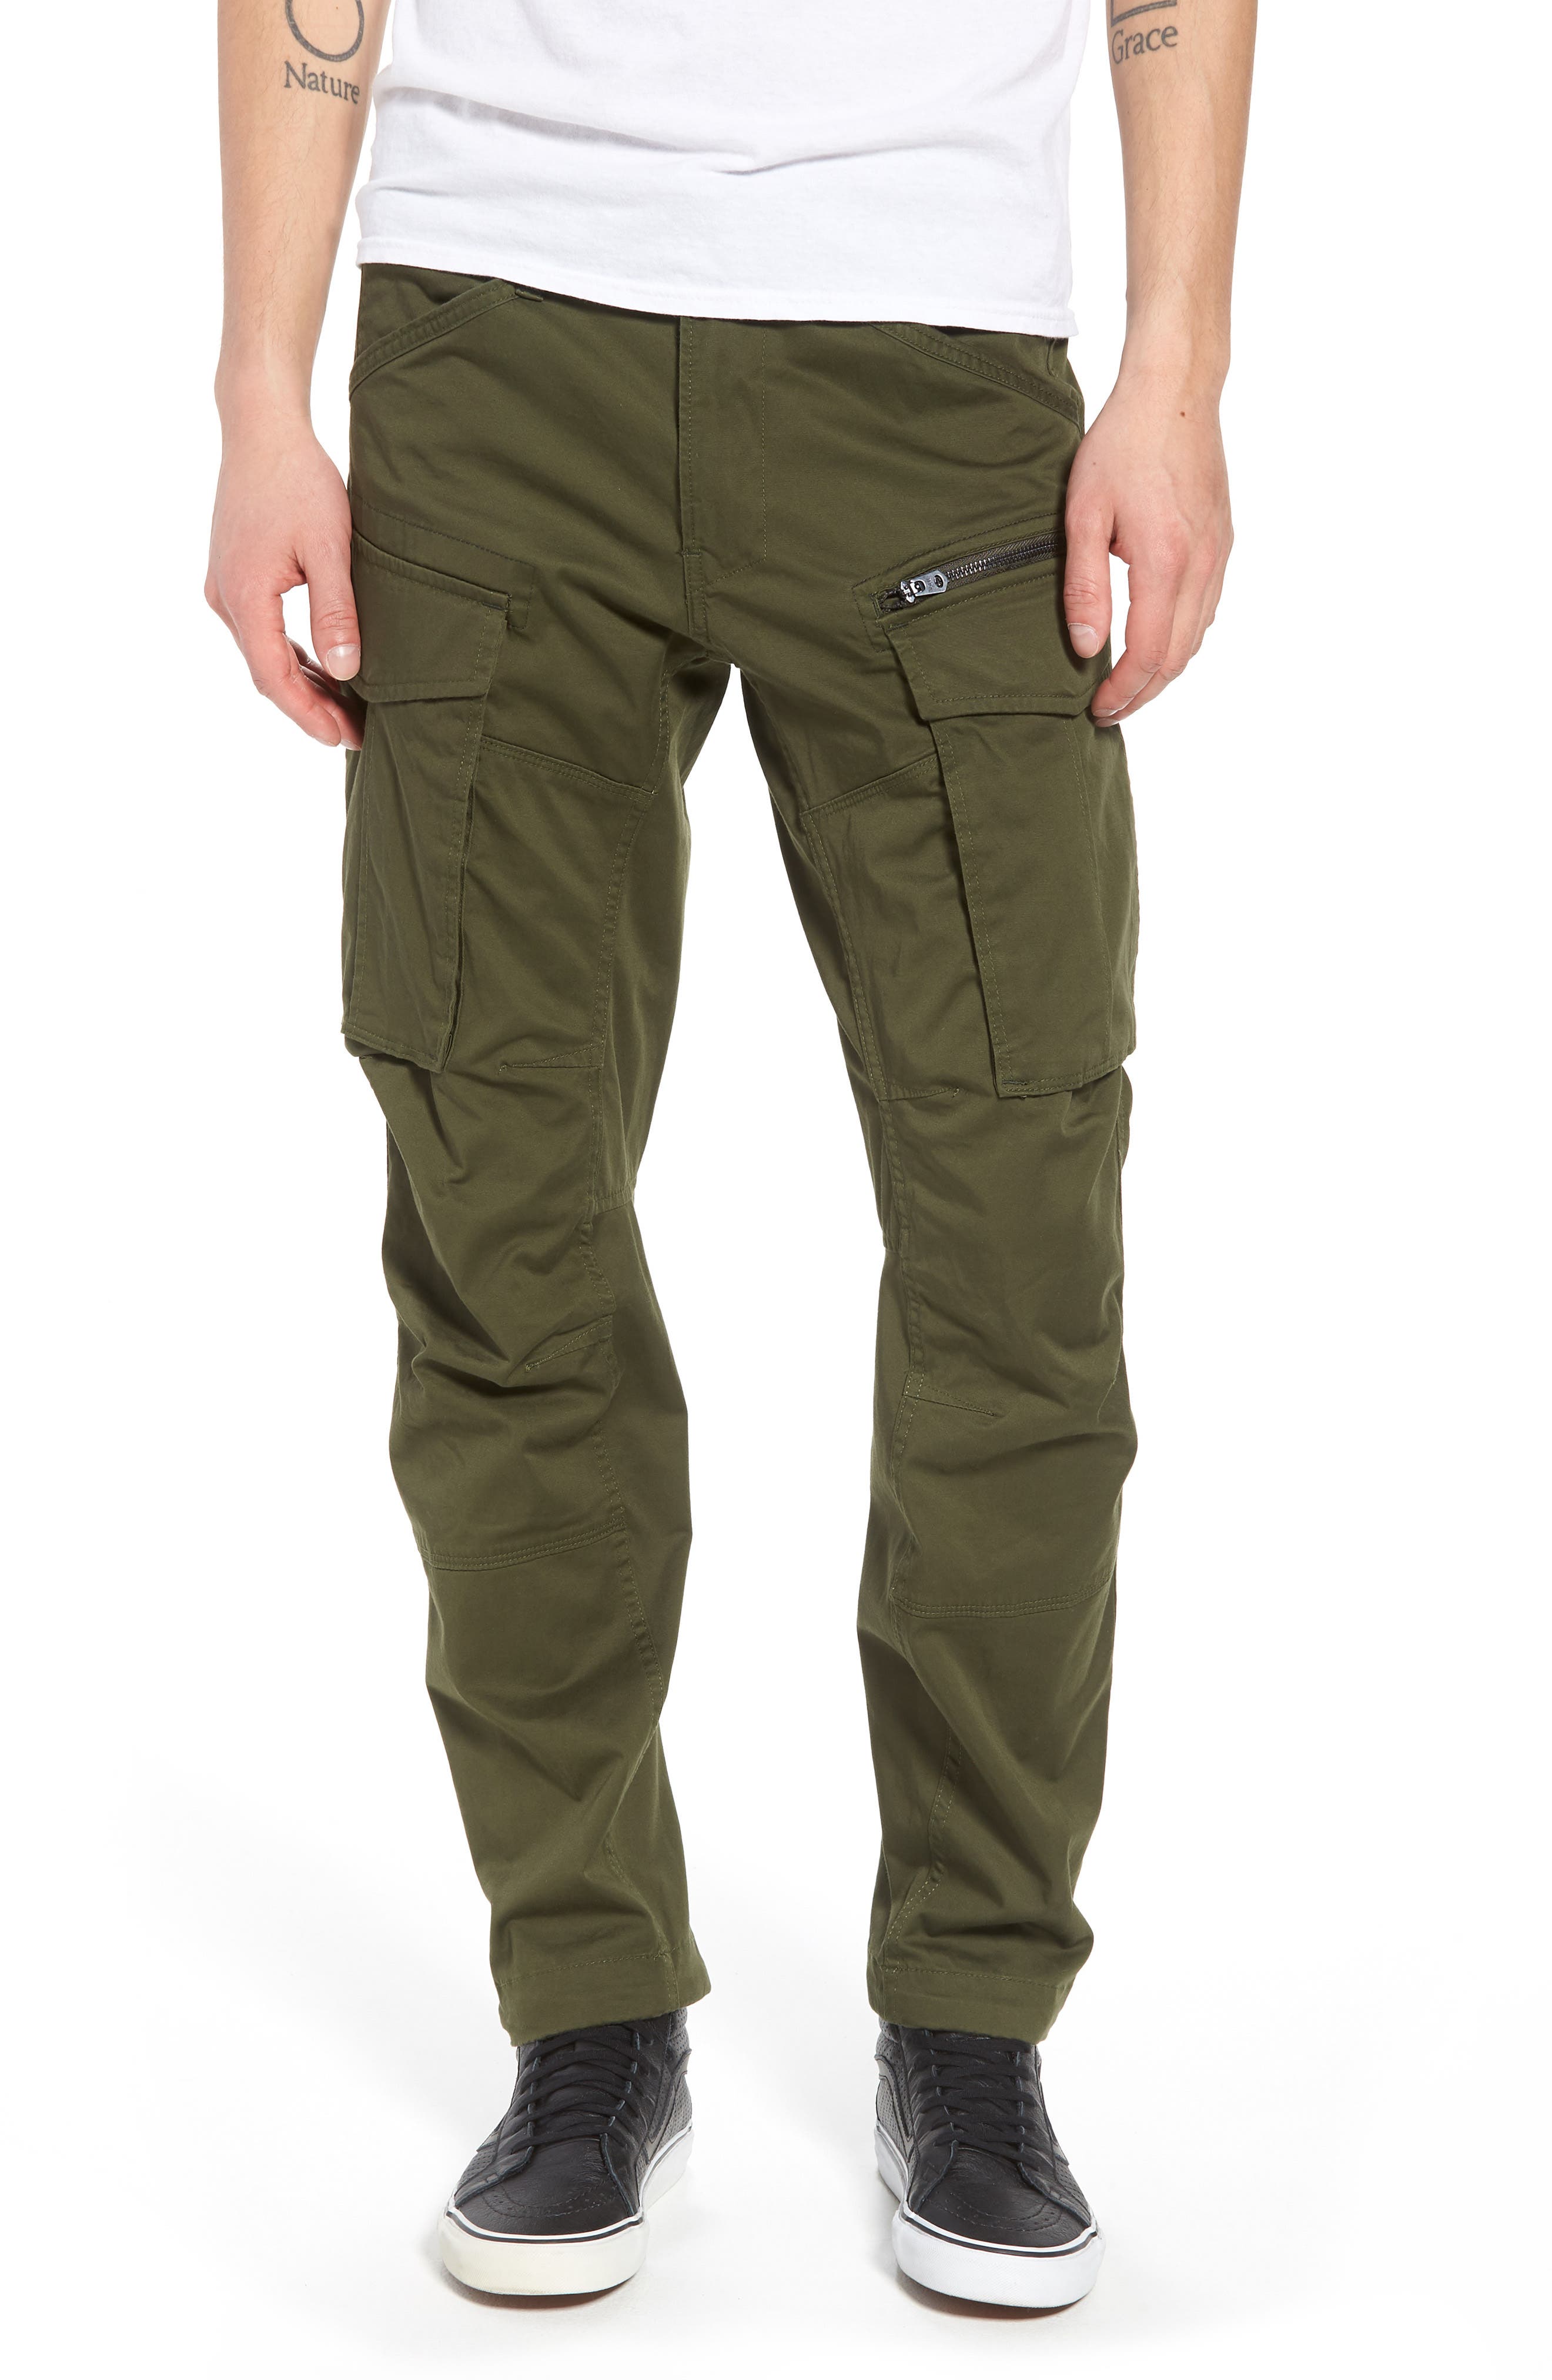 G-STAR RAW ROVIK TAPERED FIT CARGO PANTS,8718598858461